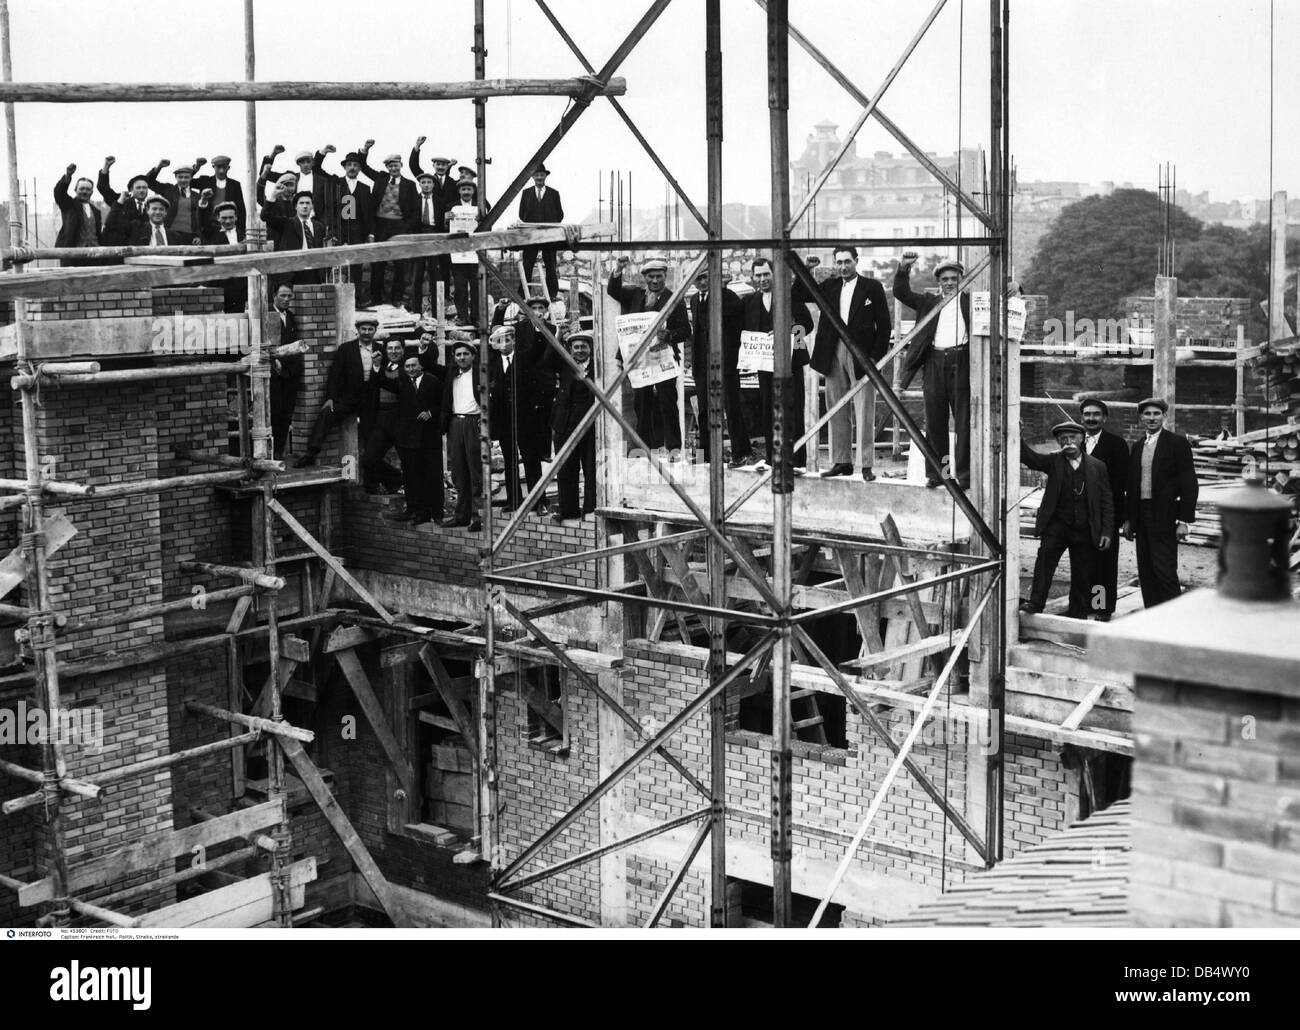 geography / travel, France, politics, strike, striking construction workers on a new house in the region of Paris, June 1936, Additional-Rights-Clearences-Not Available Stock Photo